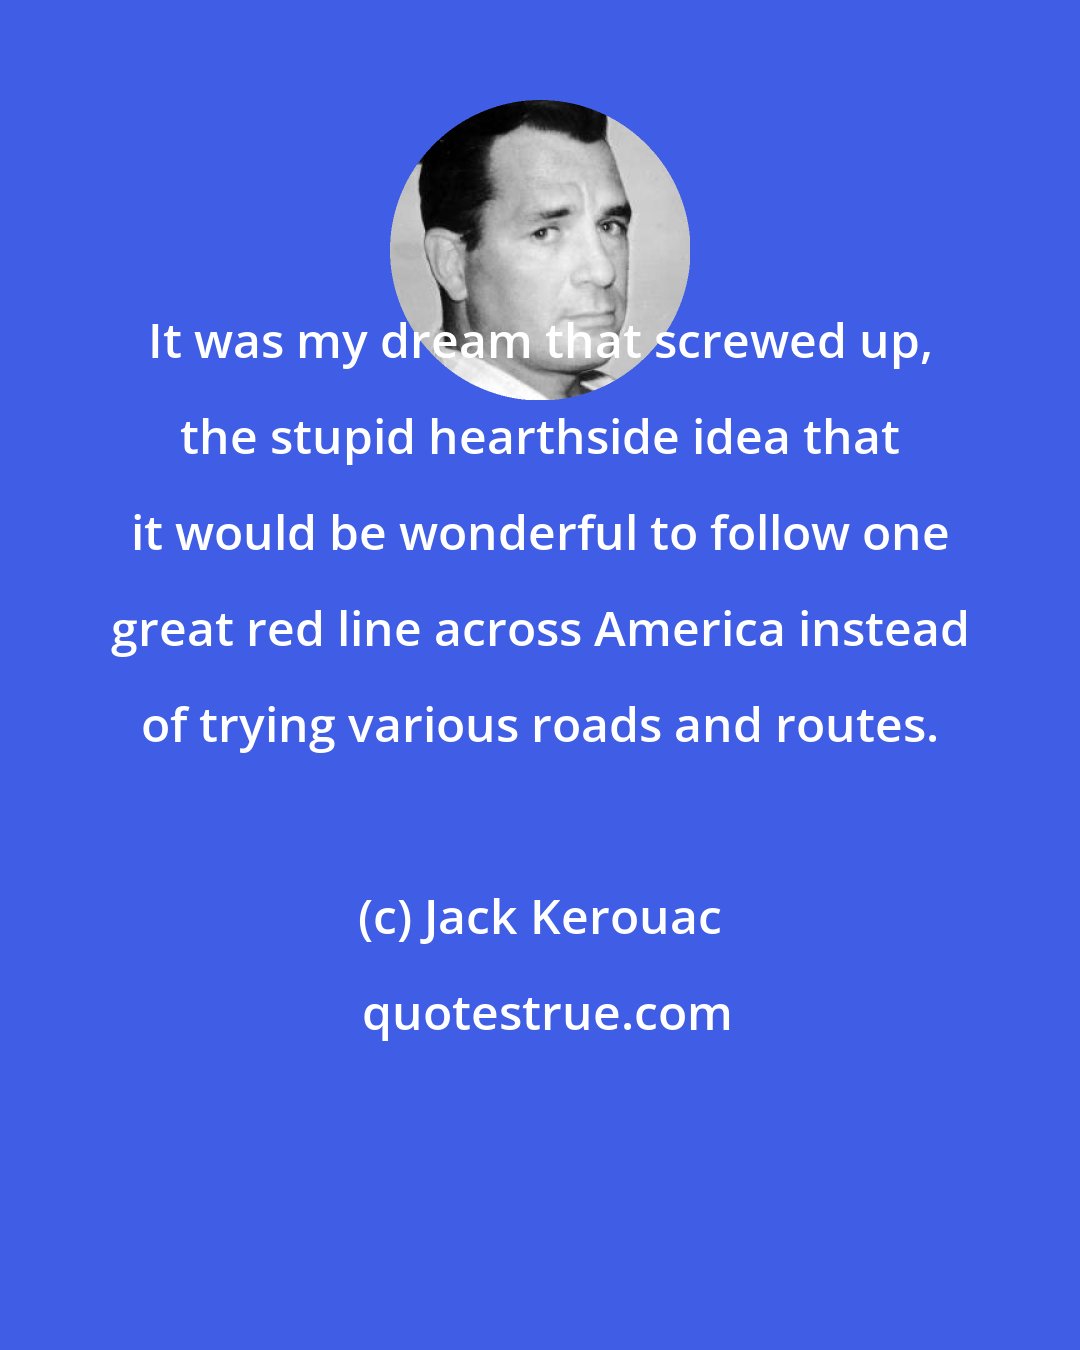 Jack Kerouac: It was my dream that screwed up, the stupid hearthside idea that it would be wonderful to follow one great red line across America instead of trying various roads and routes.